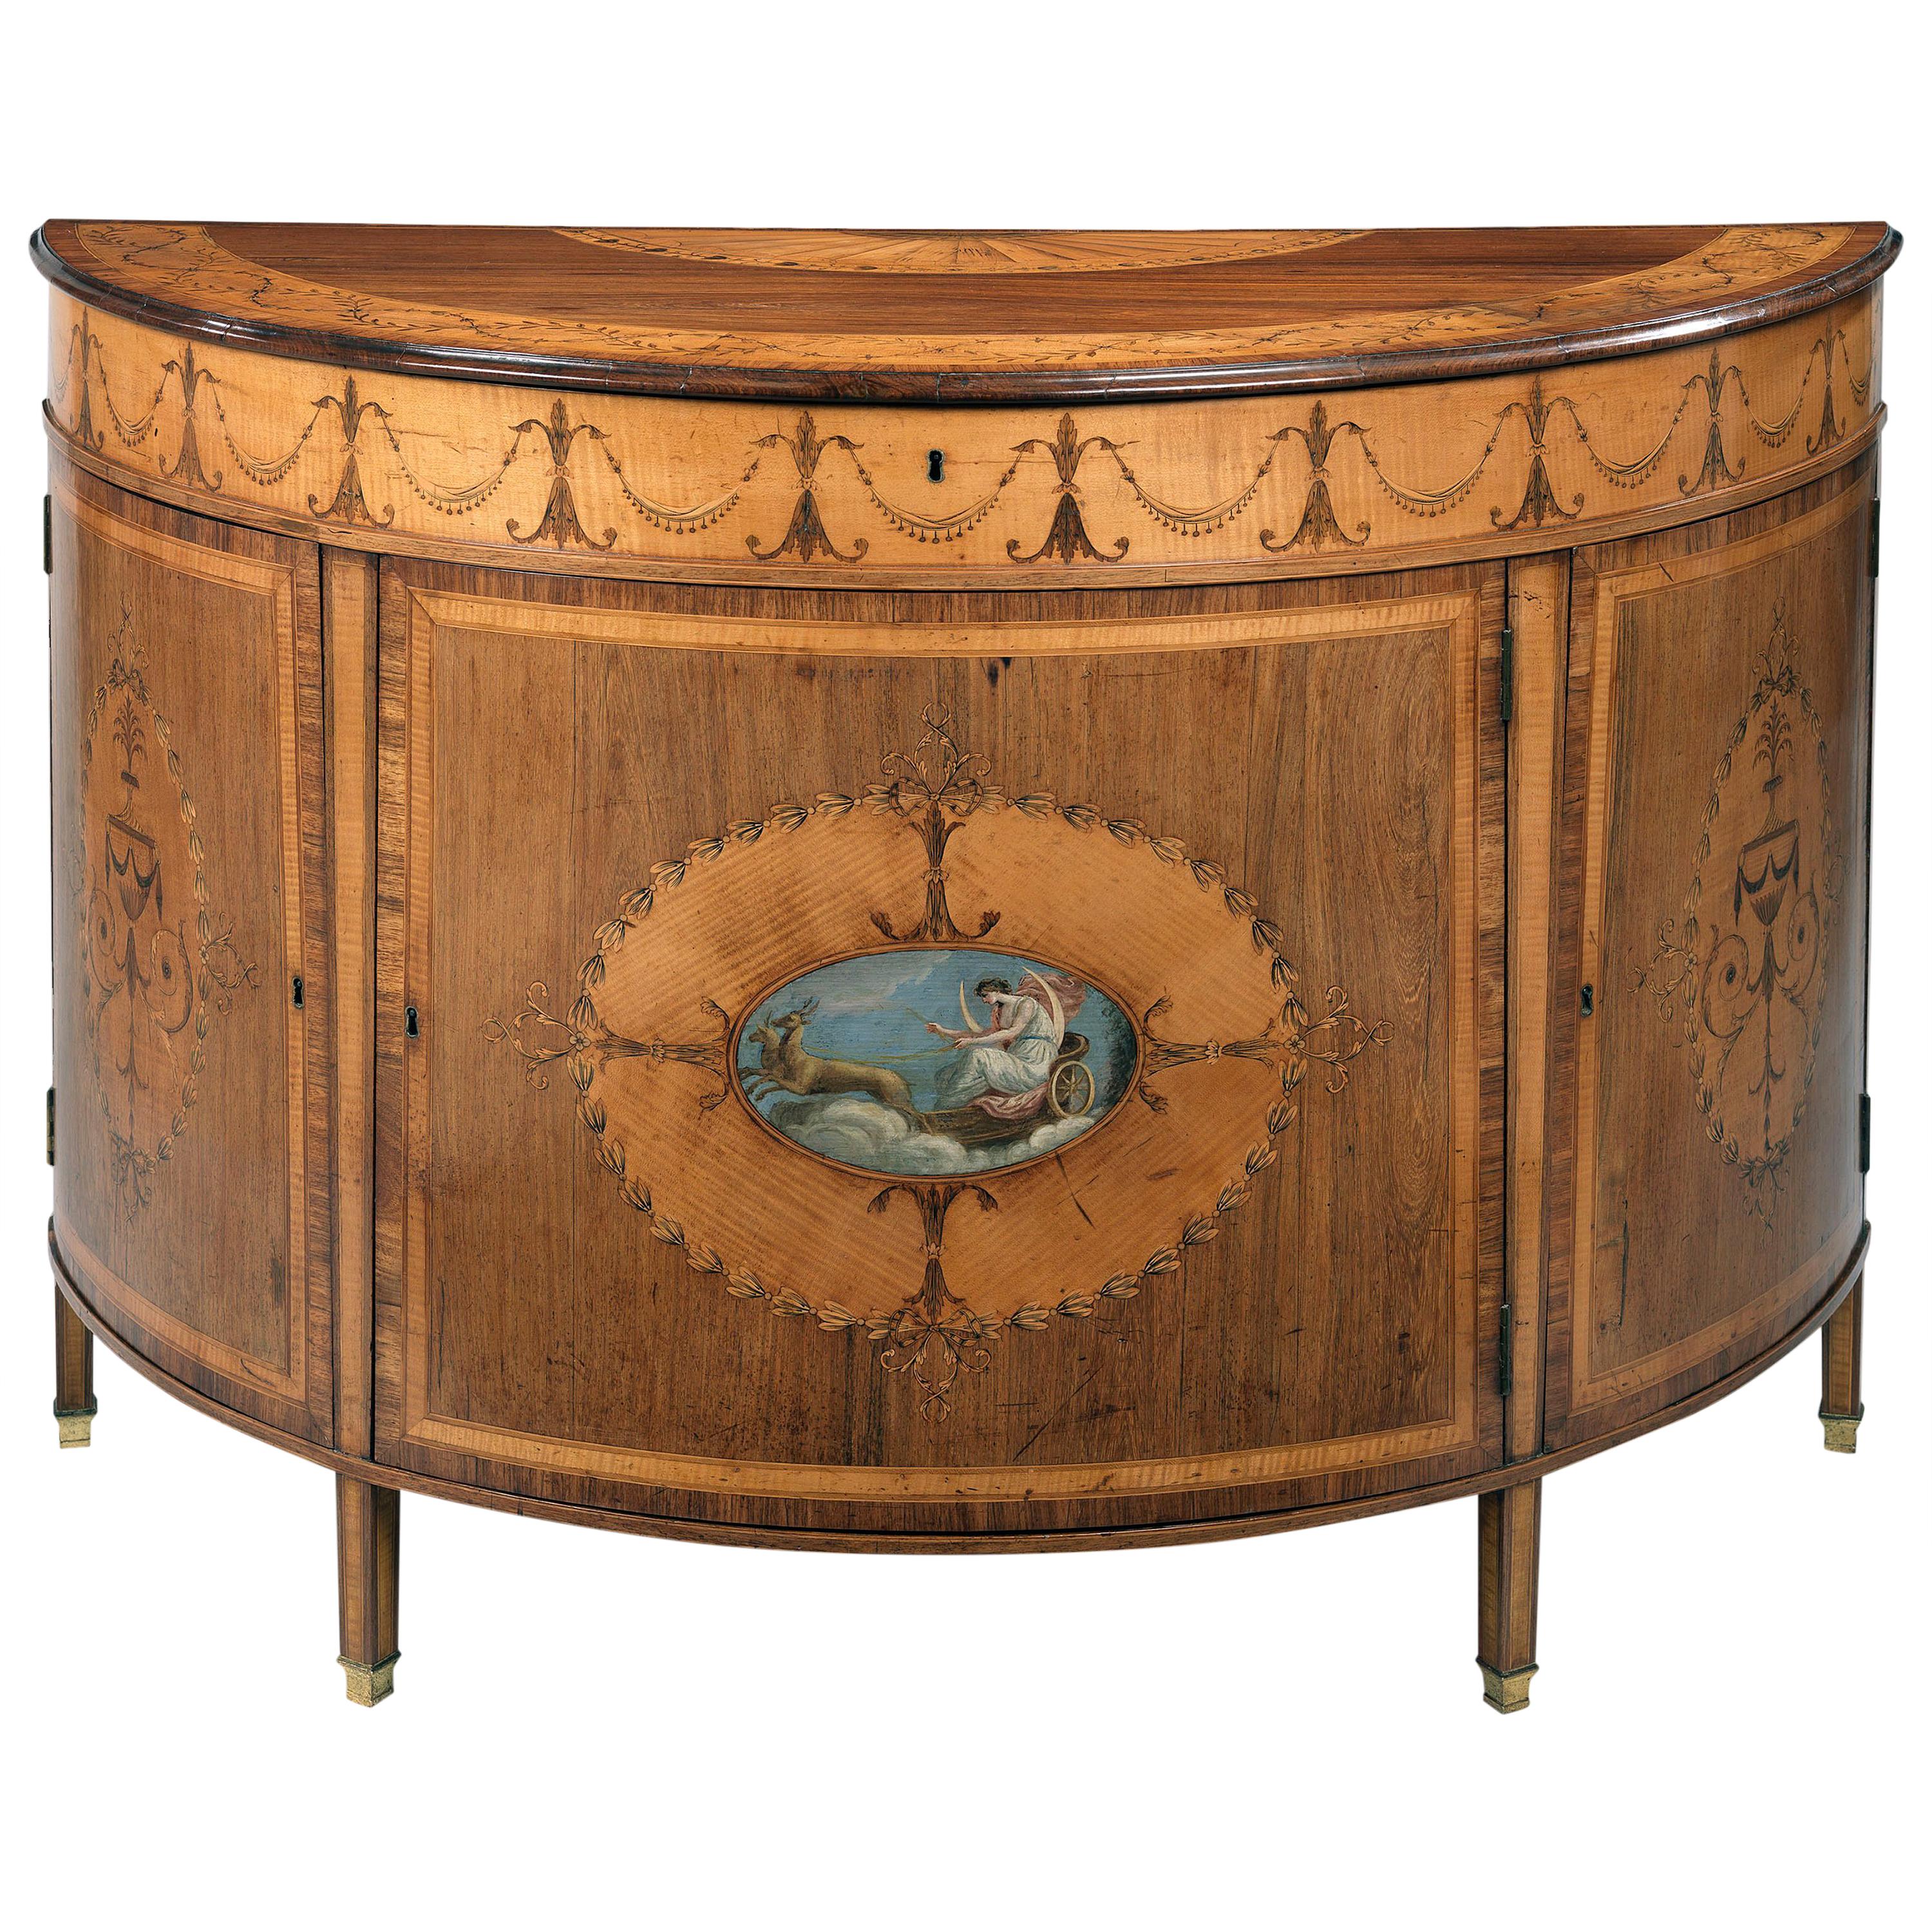 George III Polychrome-Decorated Marquetry Demilune Commode For Sale